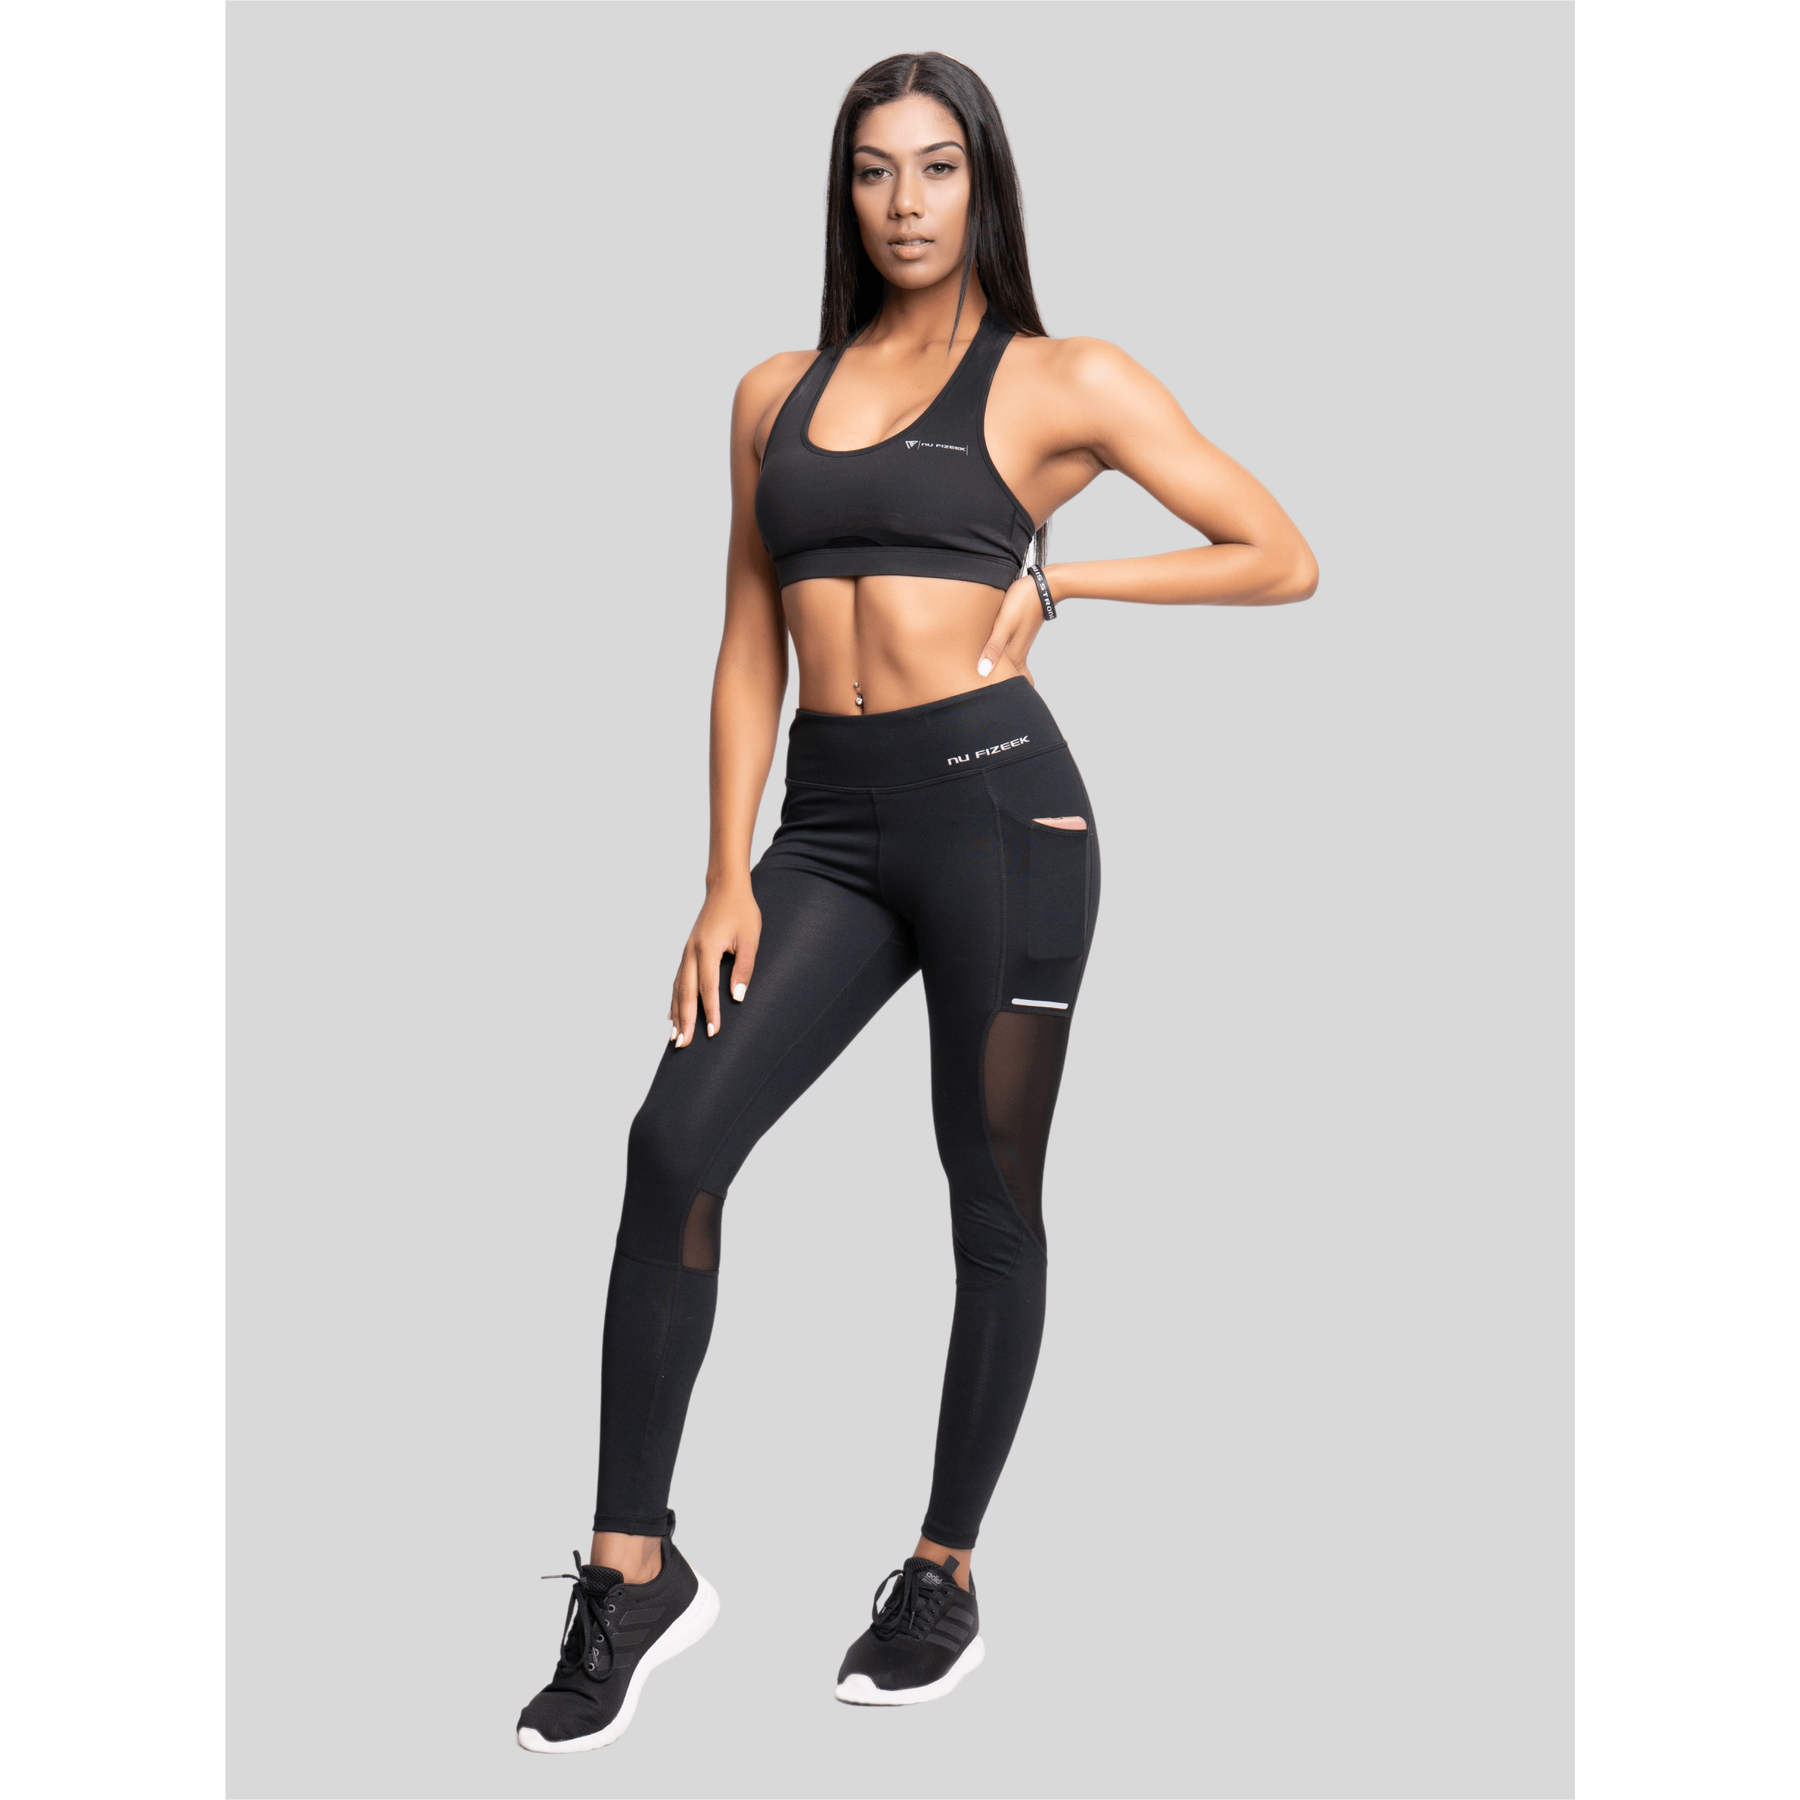 Buy Women's Sports Bra – Best in Running and Workout